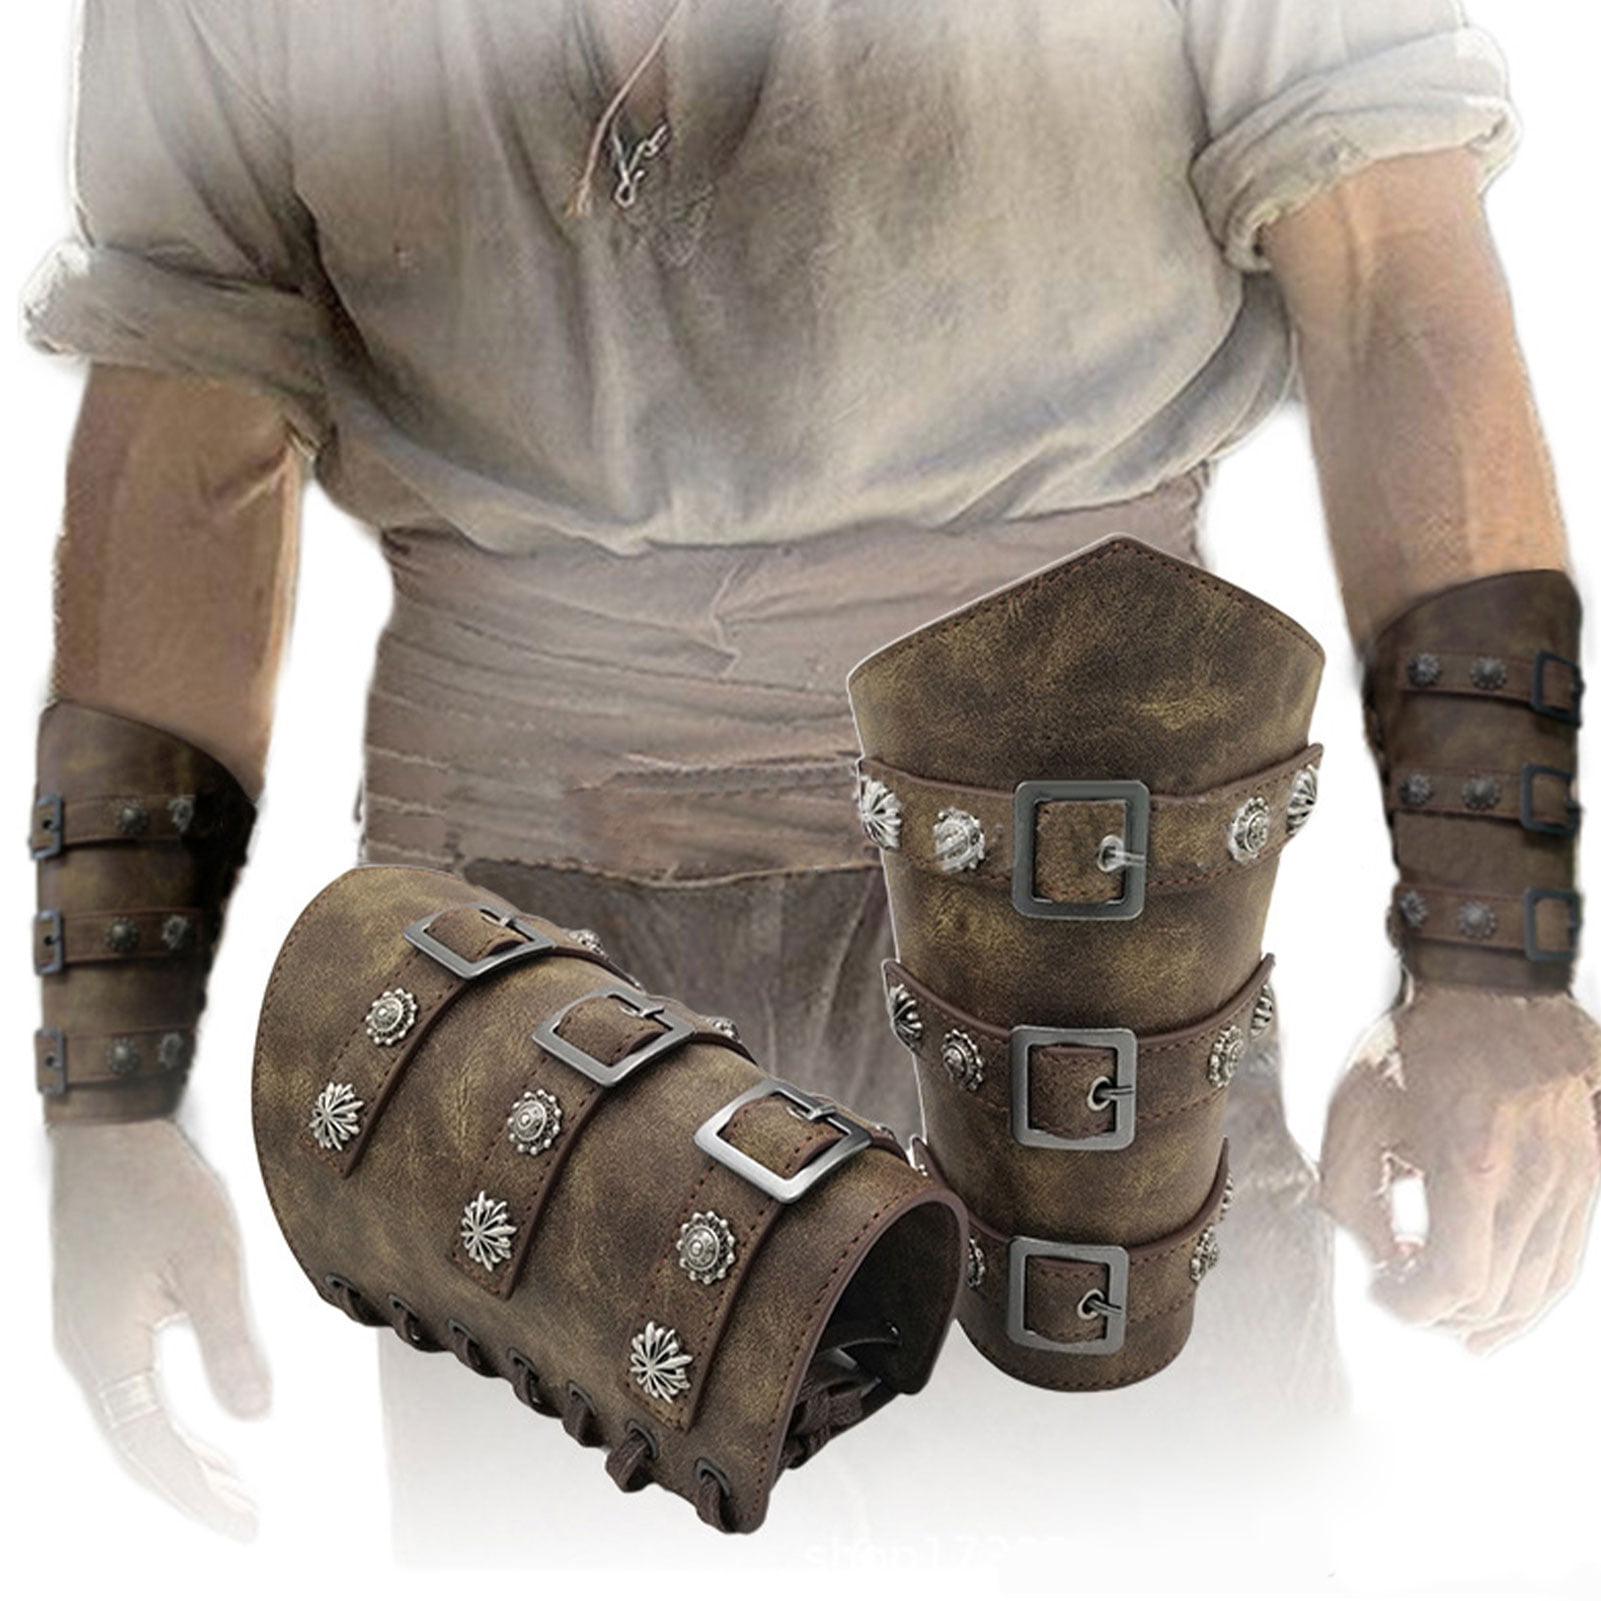 GelConnie Leather Arm Guards Medieval Wrist Gauntlet Wide Cuffs Bracers Armor 